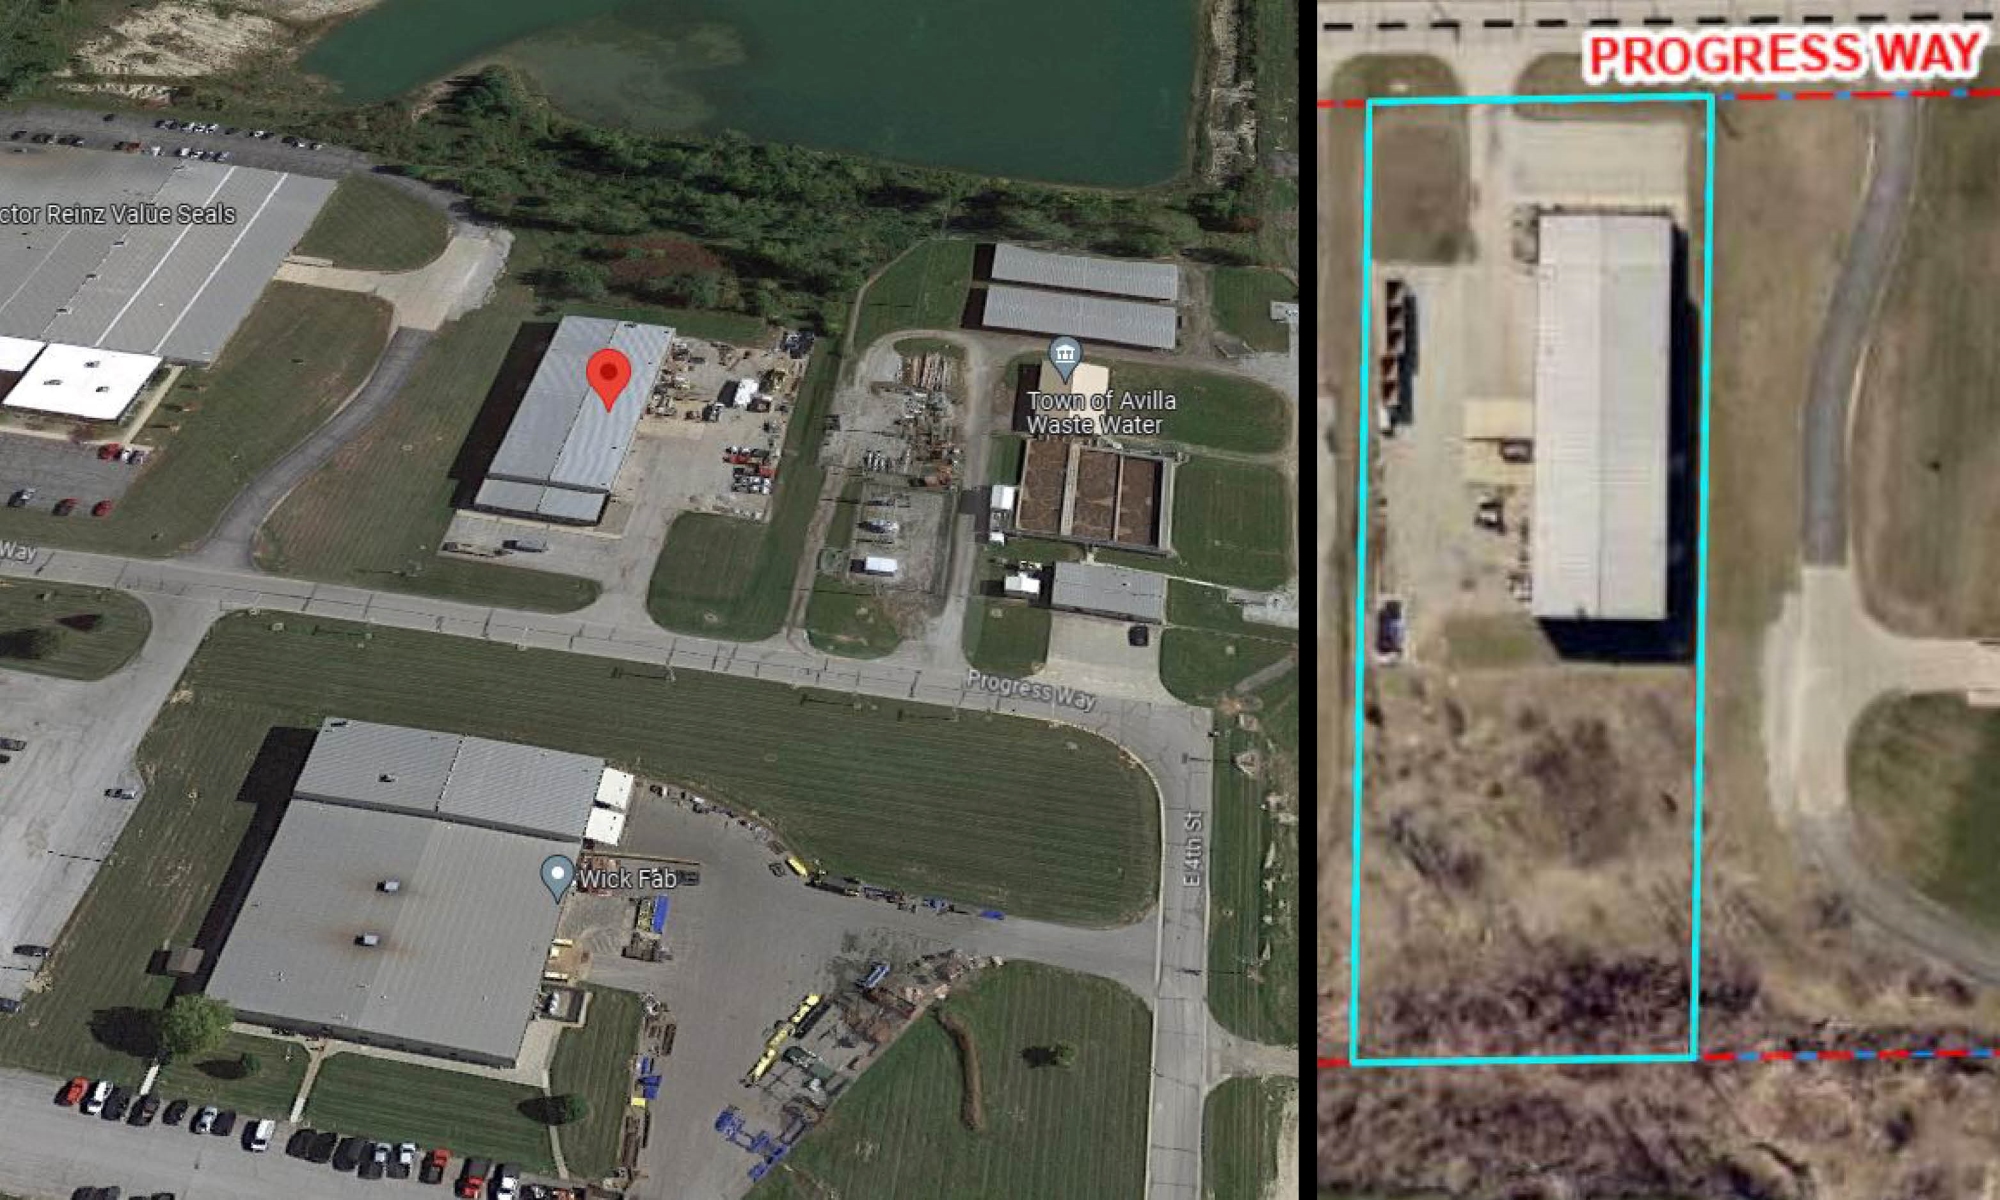 Sturges Property Group - Aerials for 333 Progress Way, Avilla, IN Warehouse/Industrial